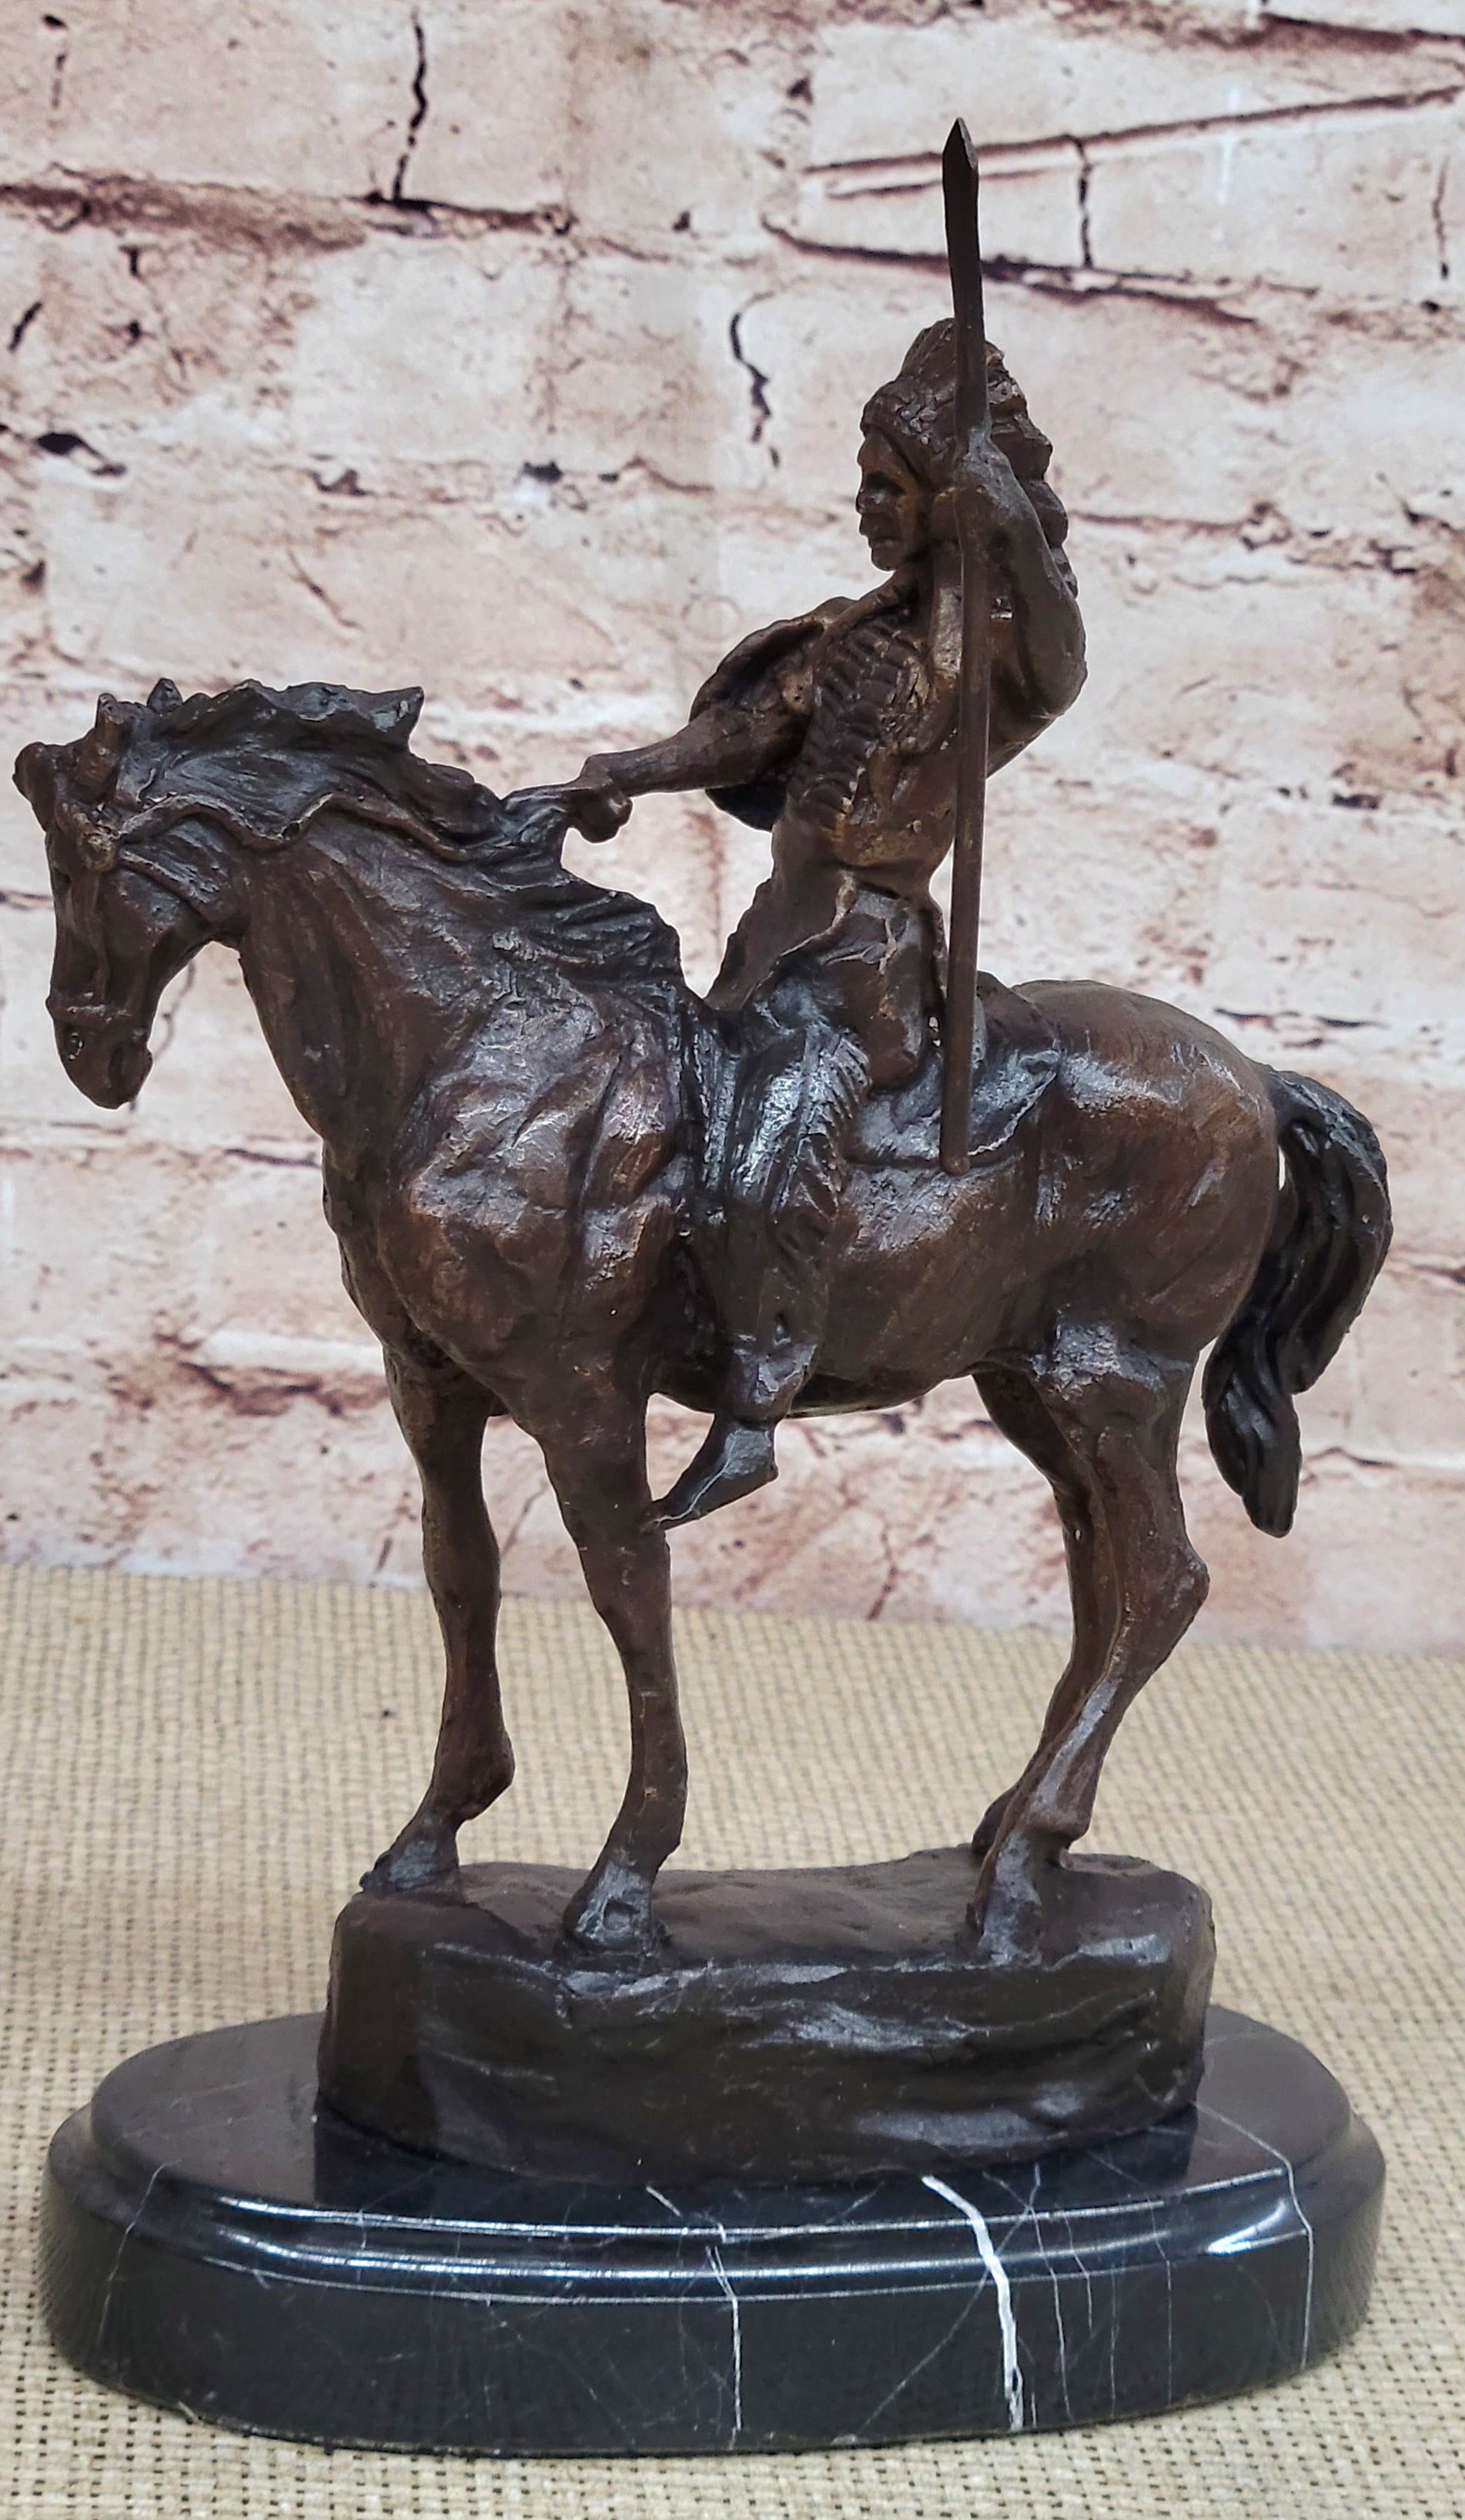 Signed Thomas Native American Indian Riding Horse Bronze Sculpture Statue Art